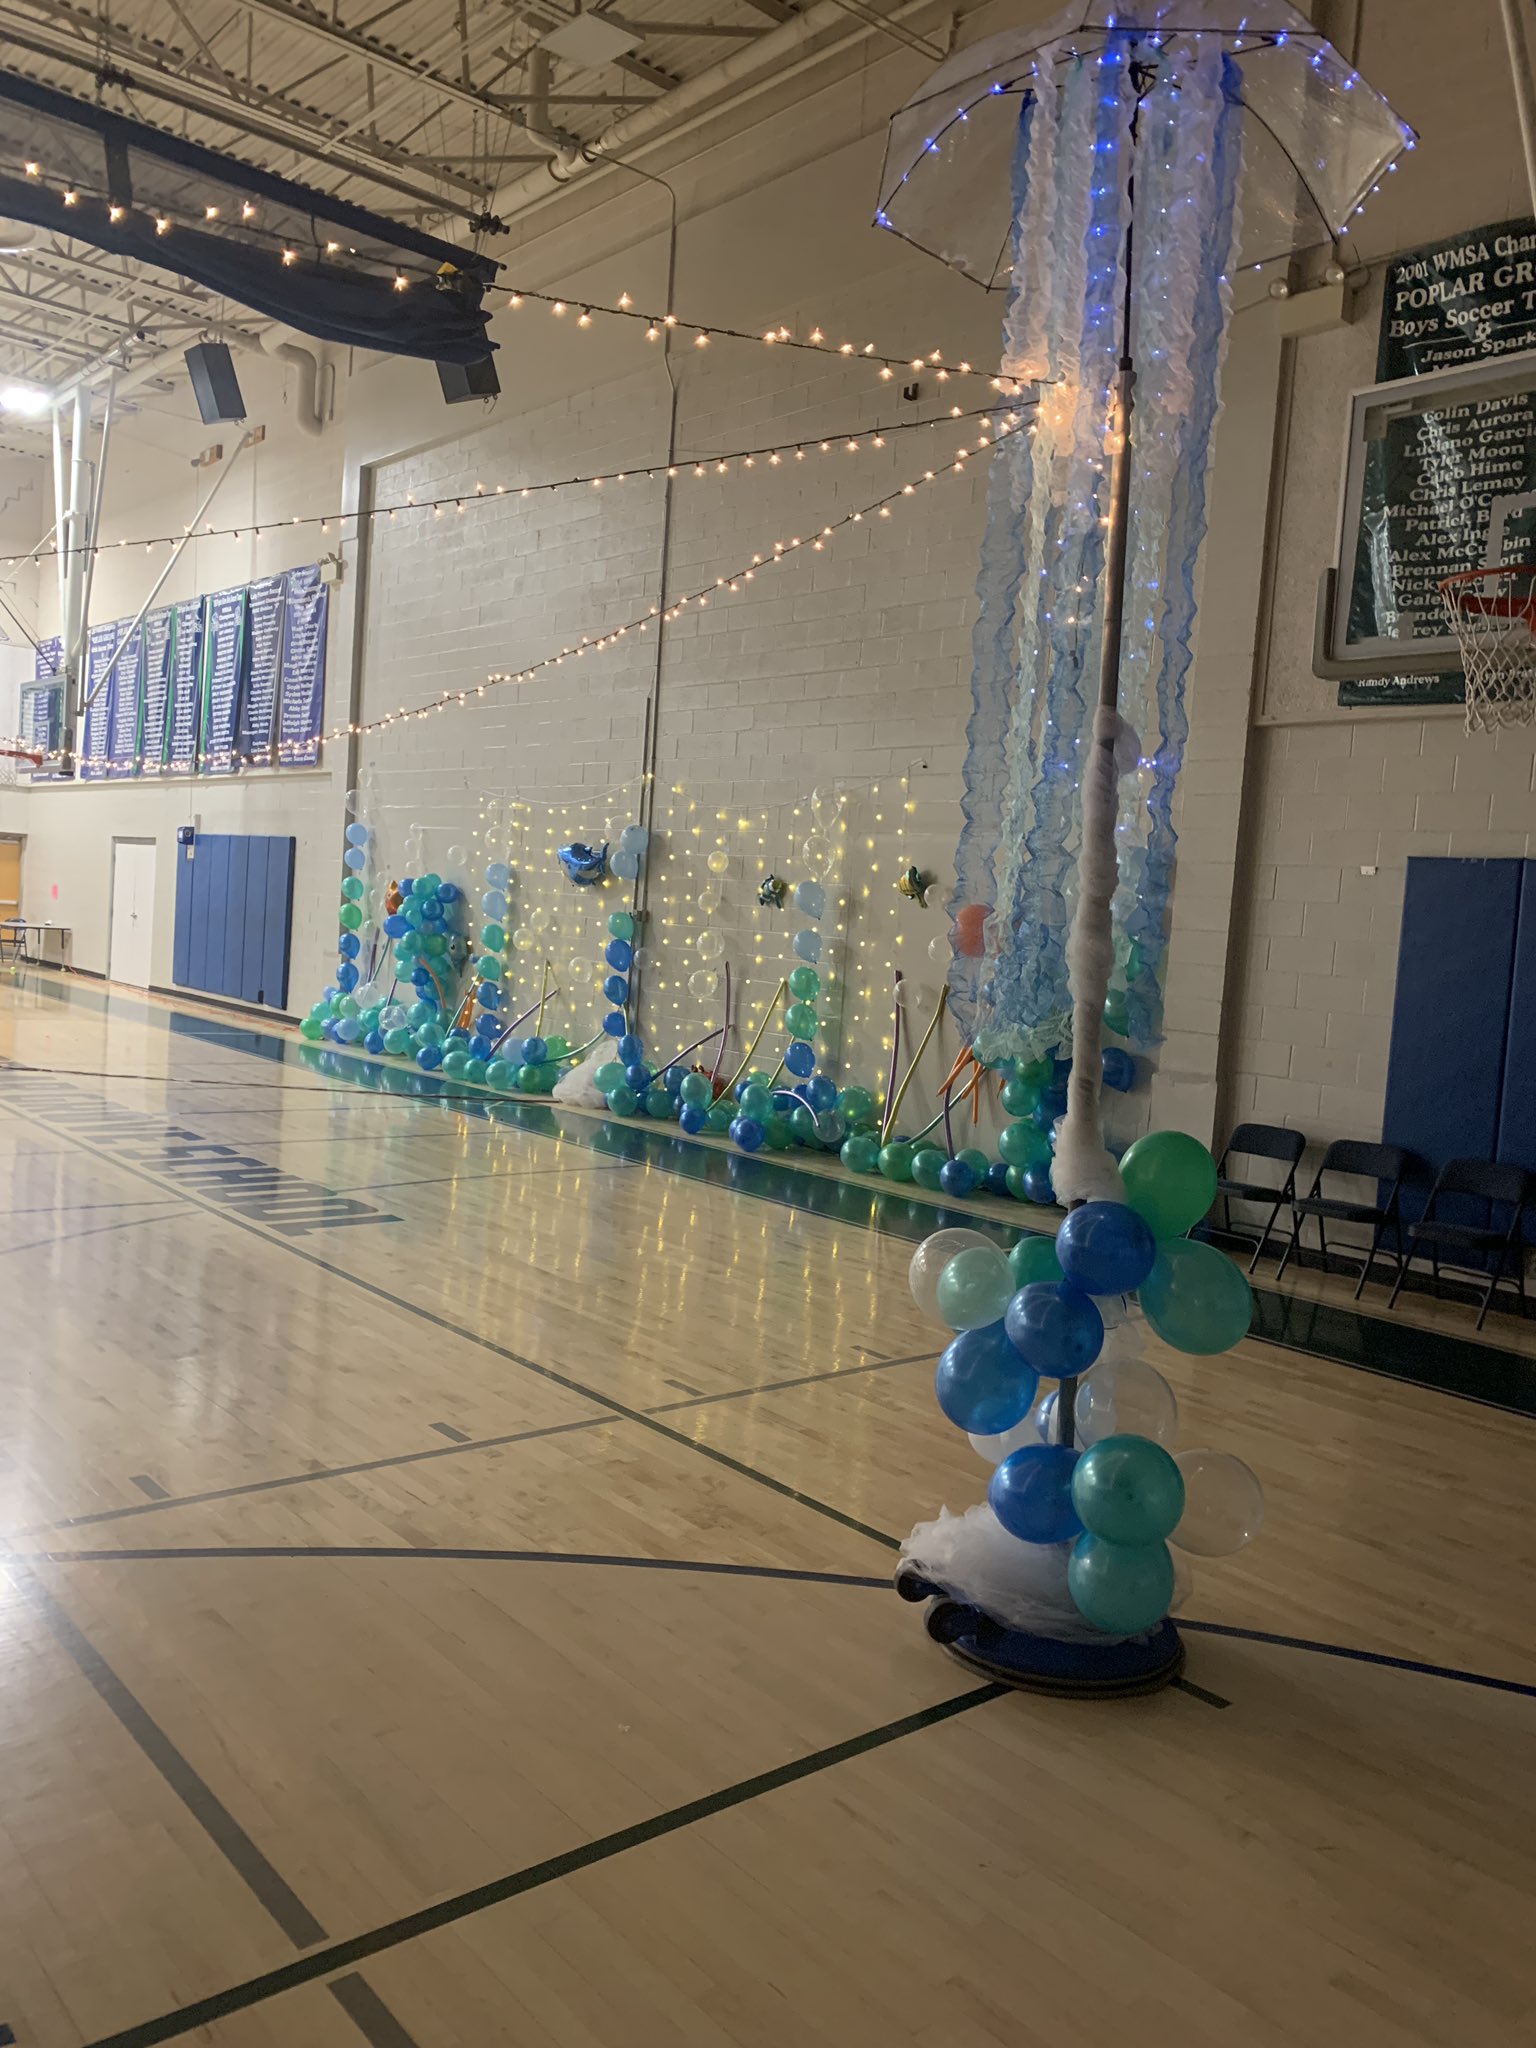 Poplar Grove K-4 on X: See you soon. The dance is ready for you